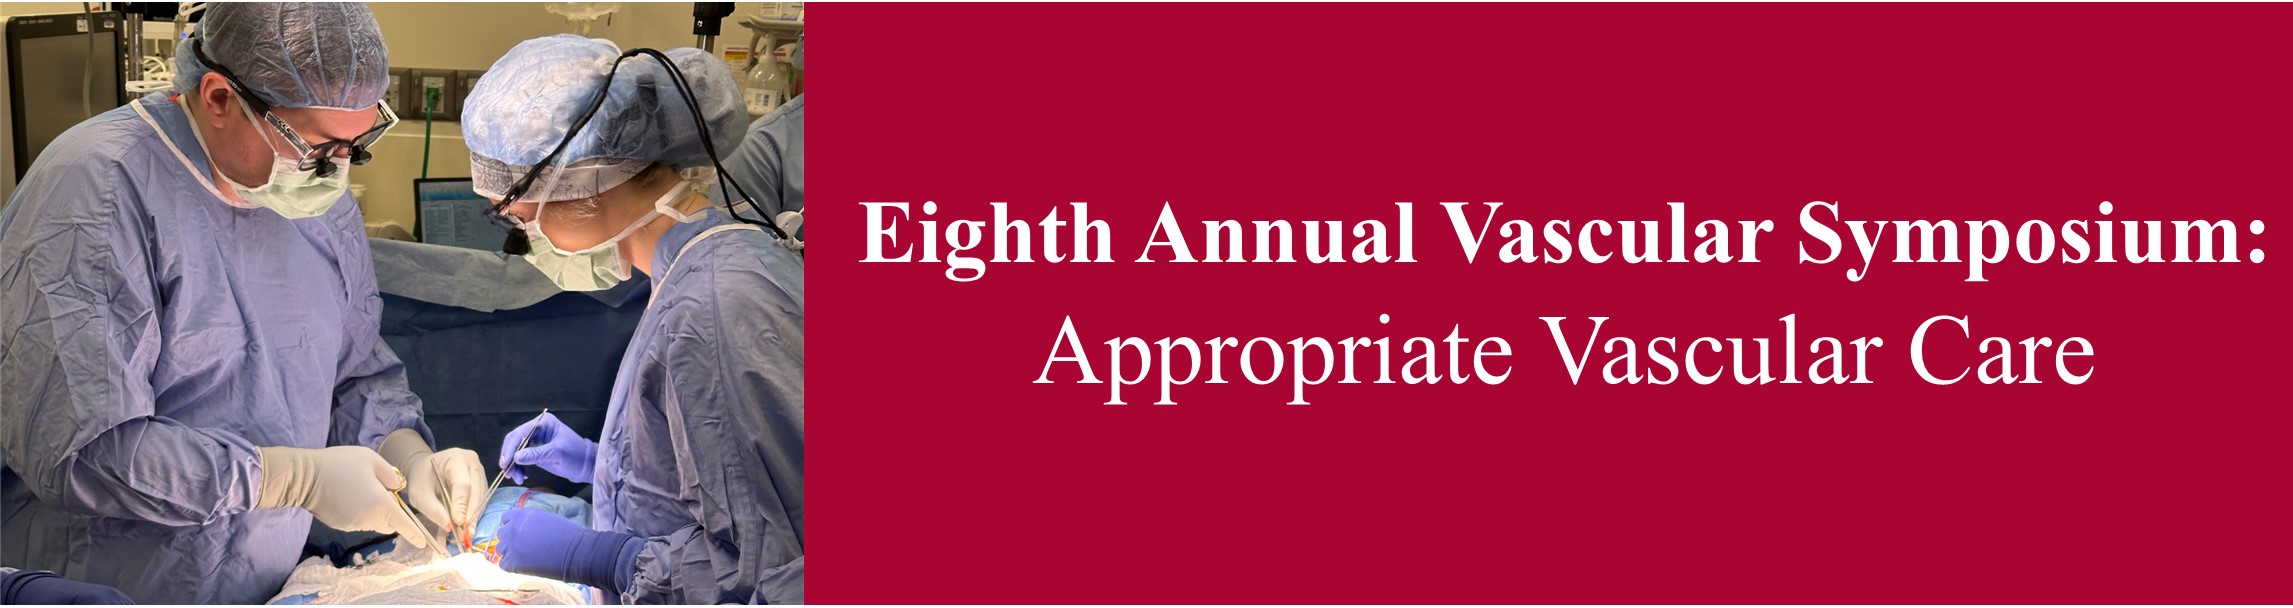 Eighth Annual Vascular Symposium: Appropriate Vascular Care Banner